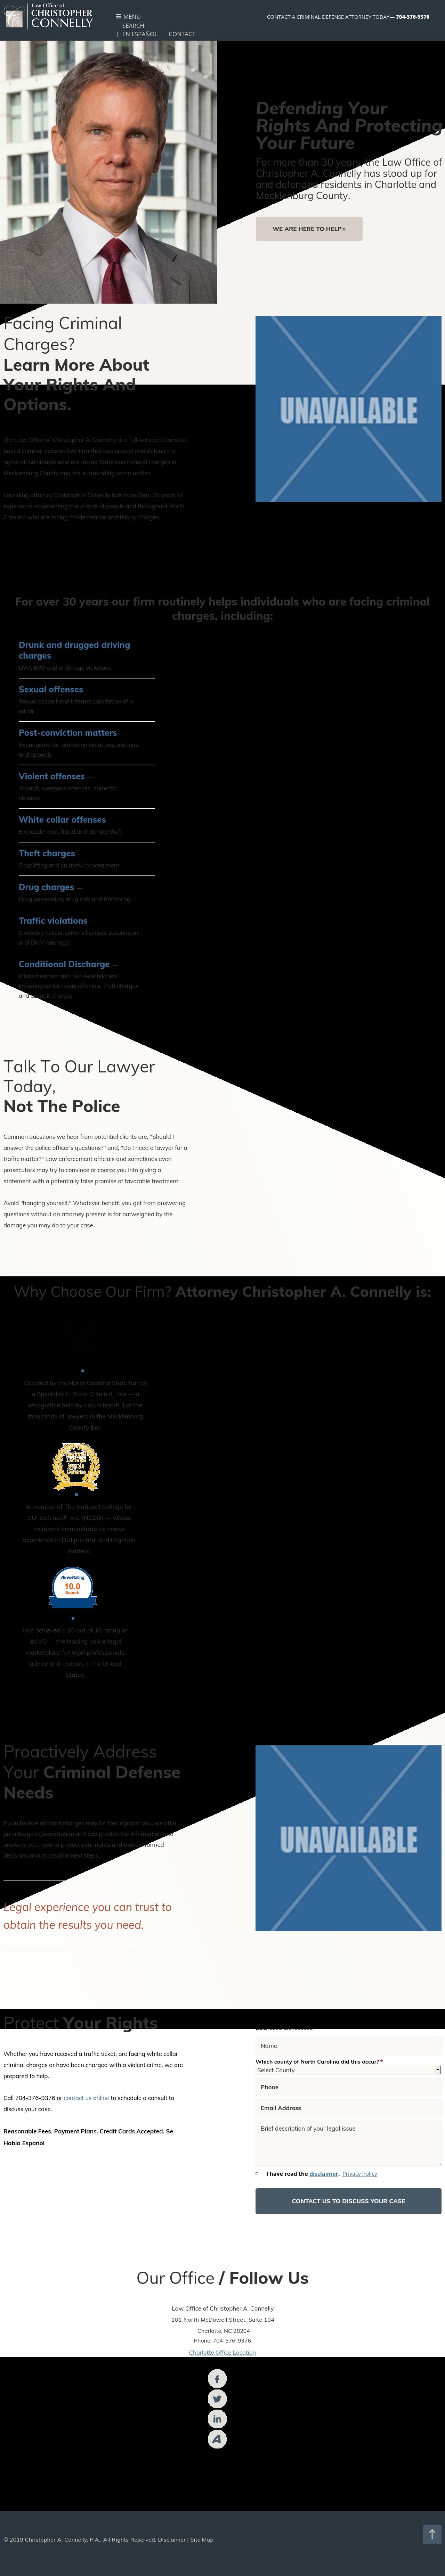 Law Office of Christopher A. Connelly - Charlotte NC Lawyers